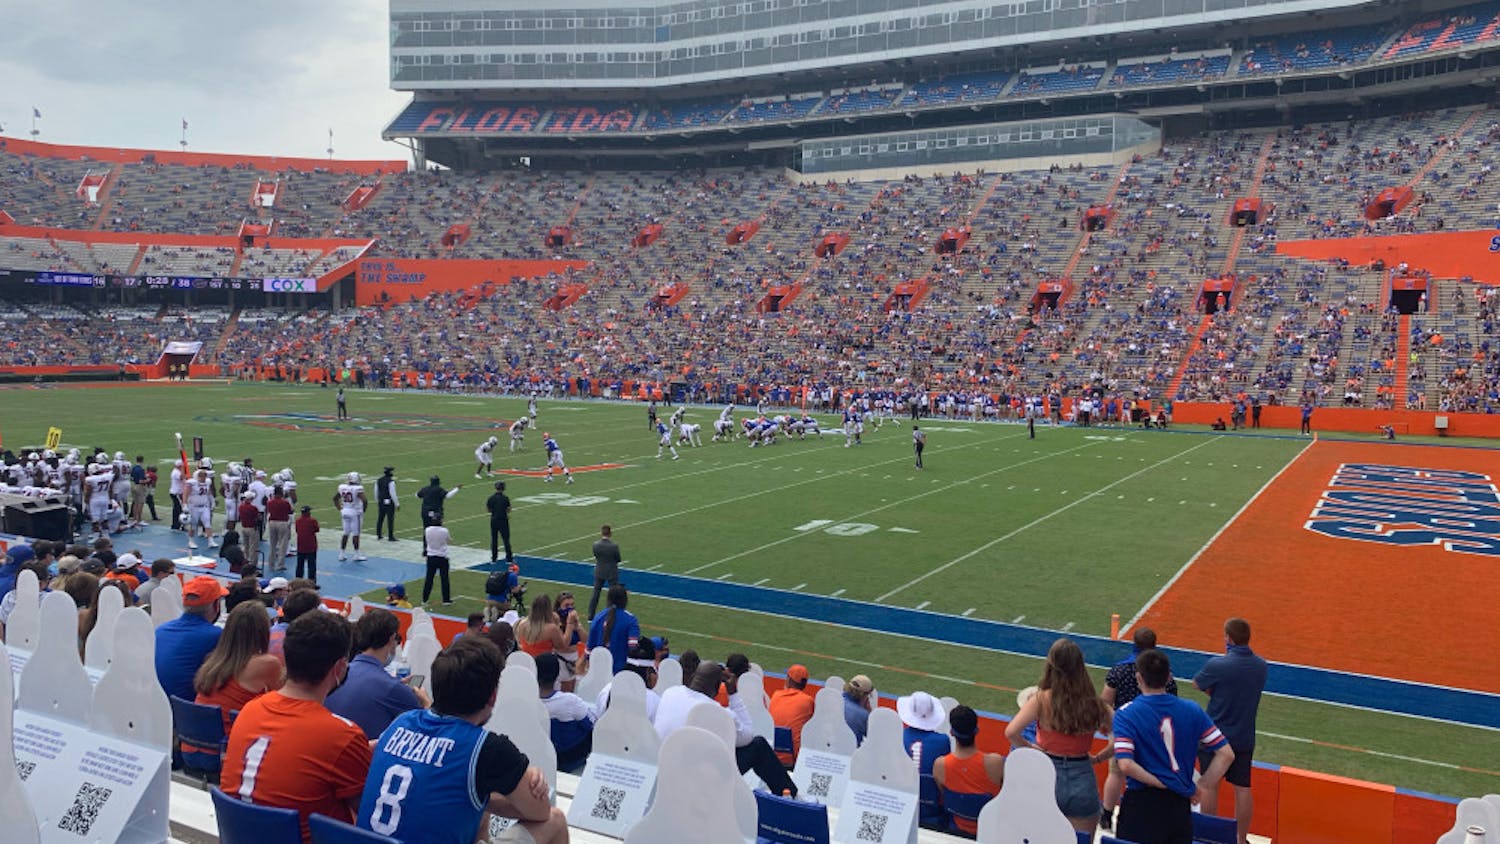 A view from the stands at Florida's home opener Saturday. The Gators beat the Gamecocks 38-24.